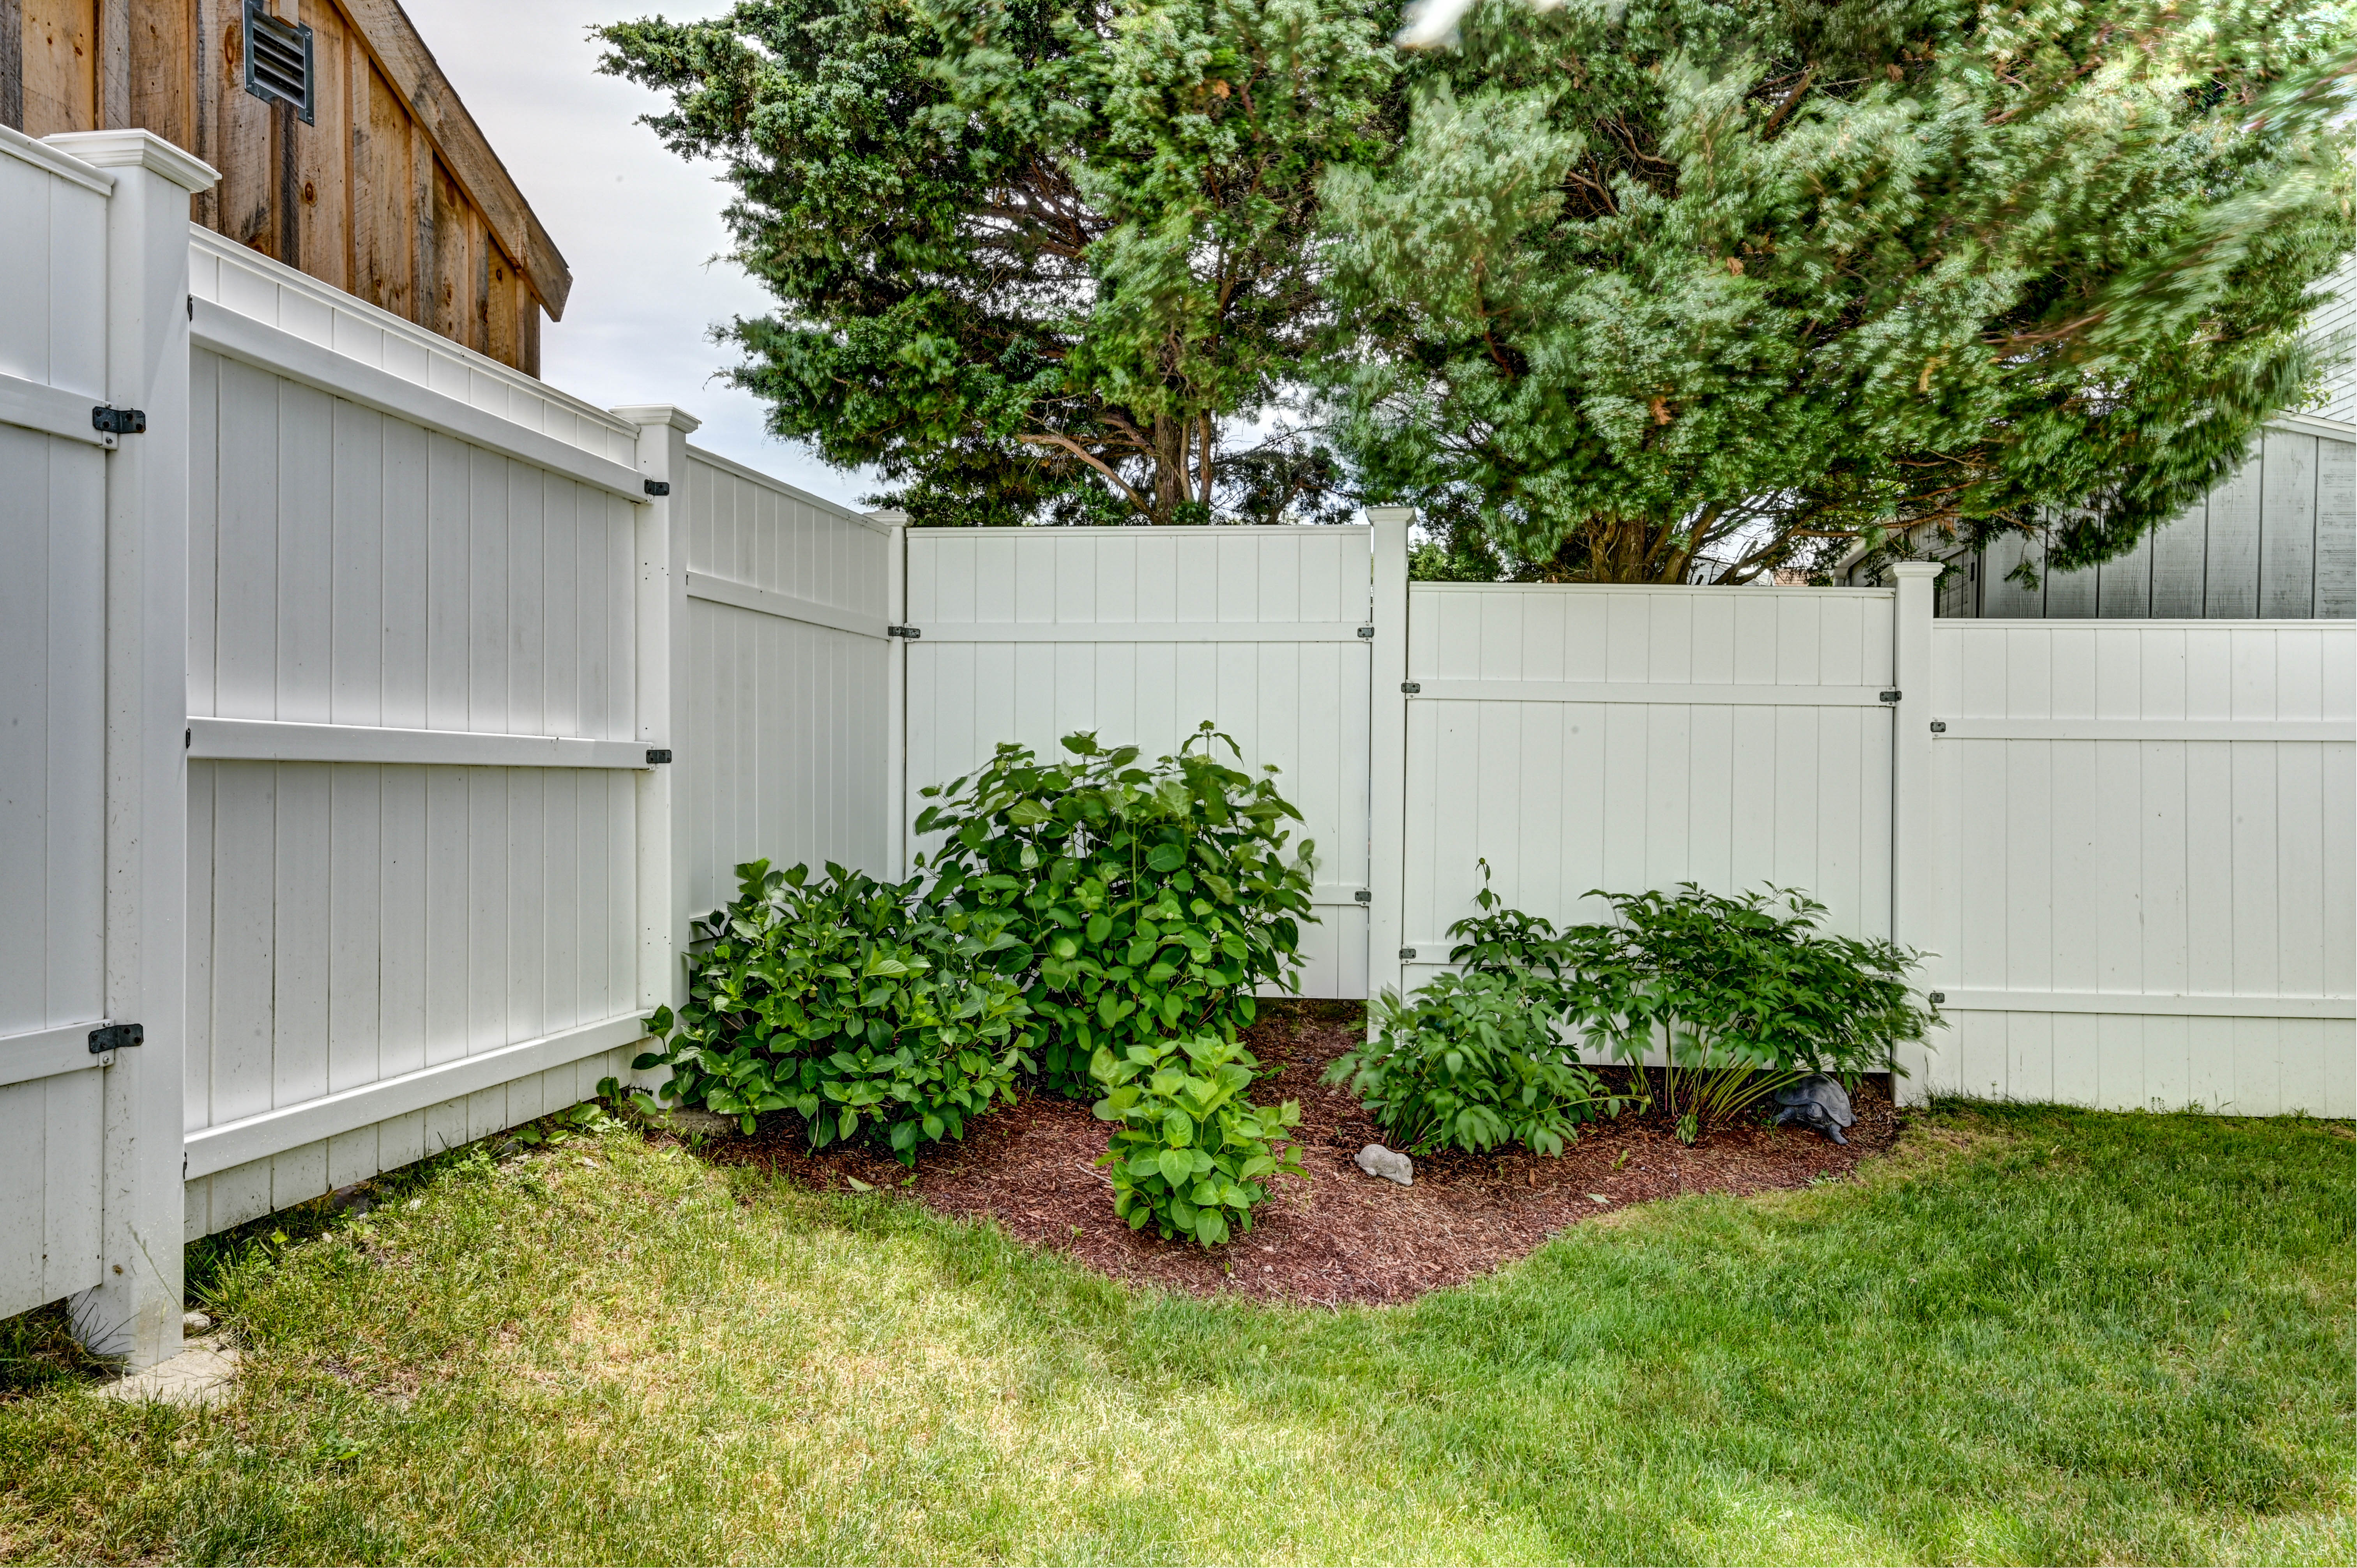 130-common-fence-portsmouth-ri-plantings